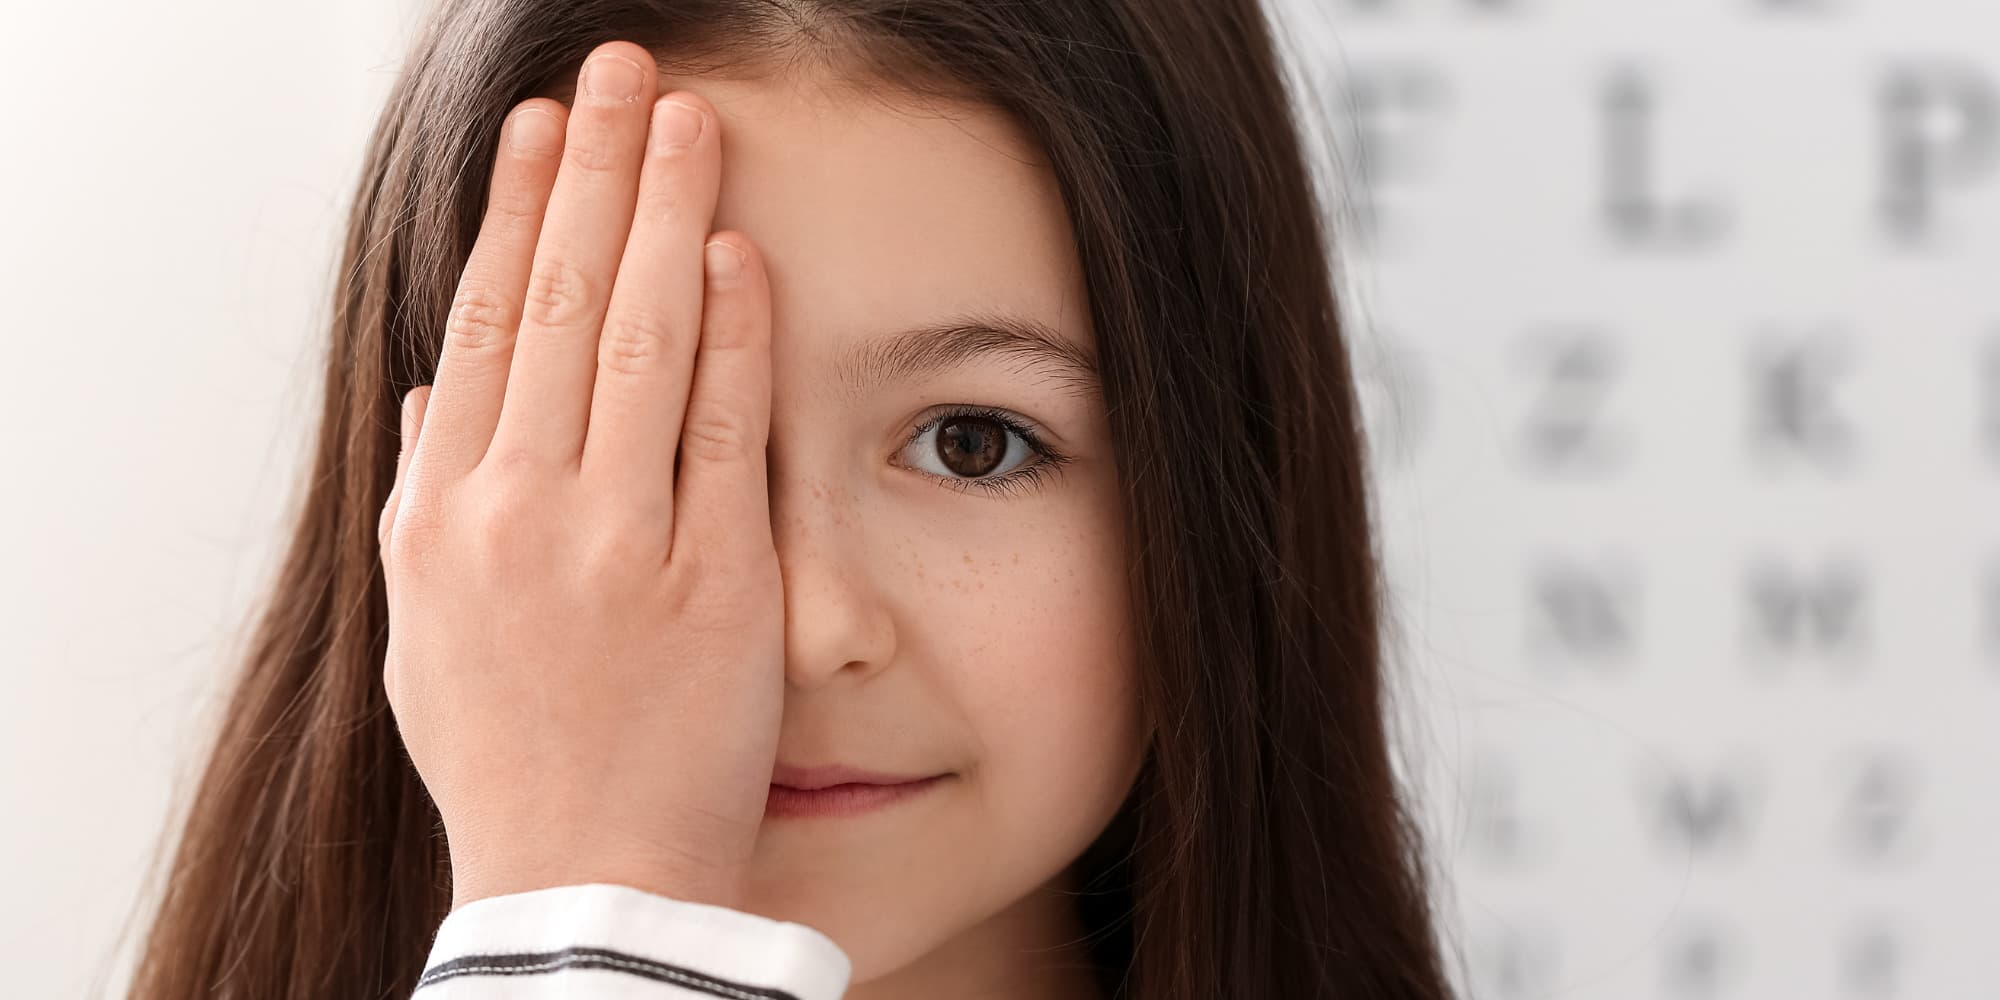 A young girl is looking towards the camera with one hand covering her right eye as if she is doing an eye test